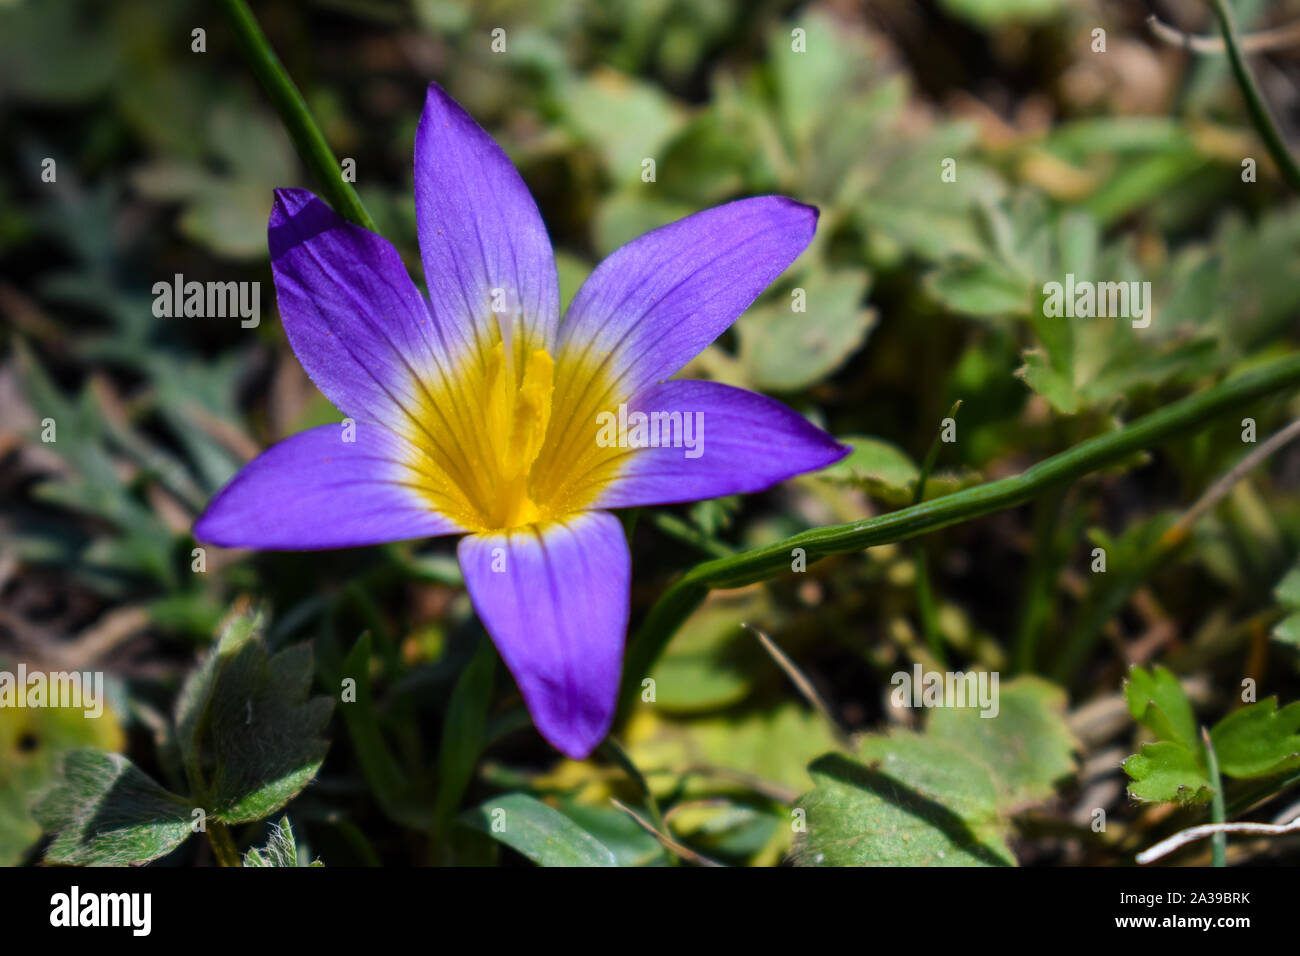 Crocus-leaved romulea beautiful flower with it's purple and yellow colors Stock Photo